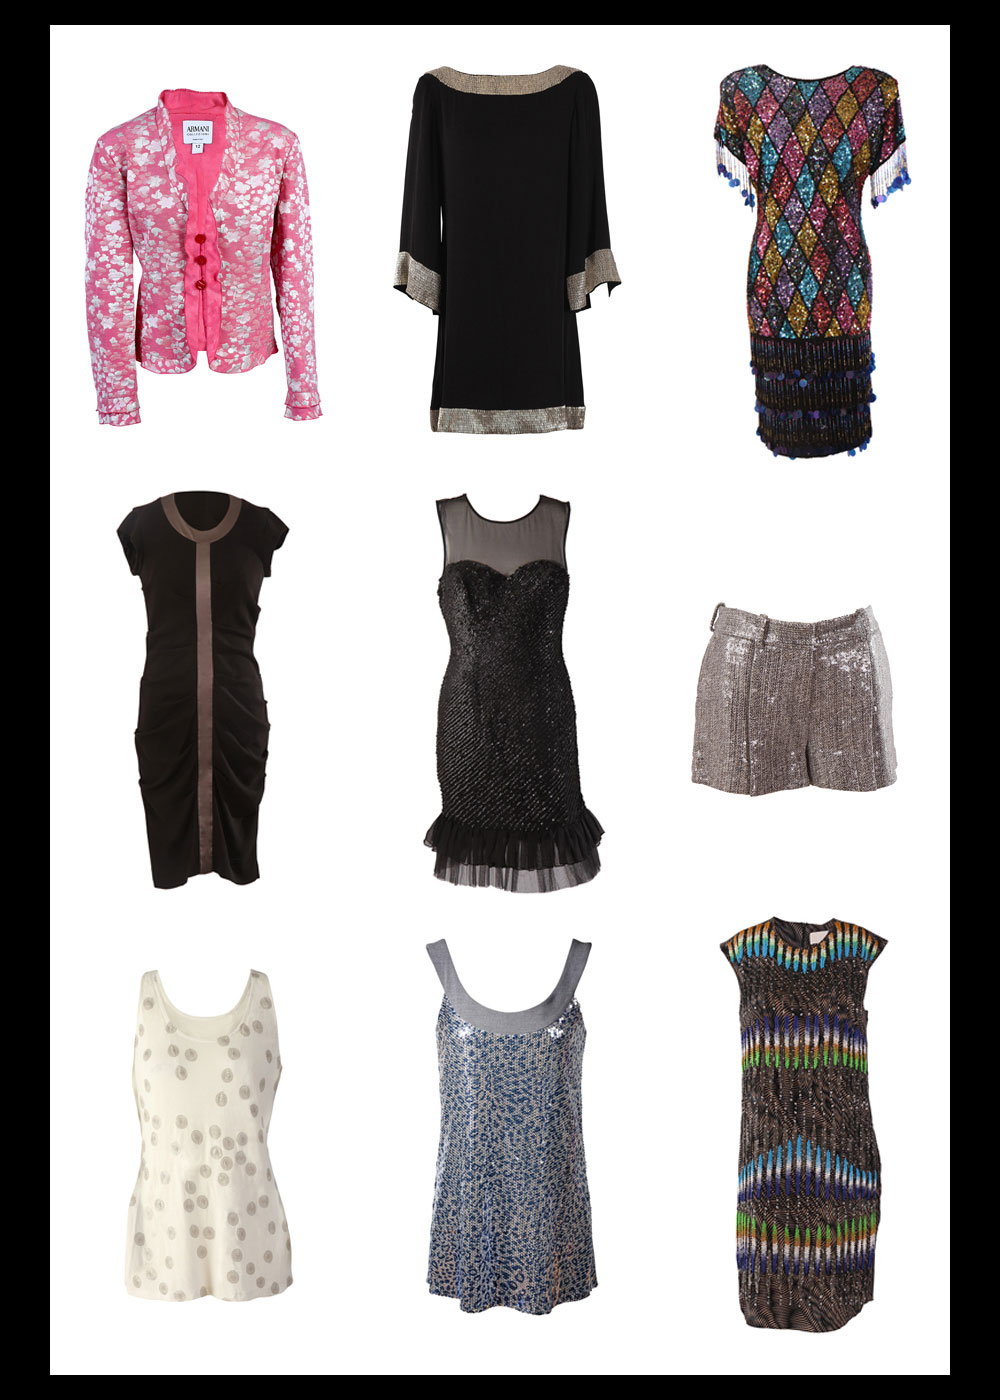 Product ECommerce Photography of Beaded and Sequin Garments